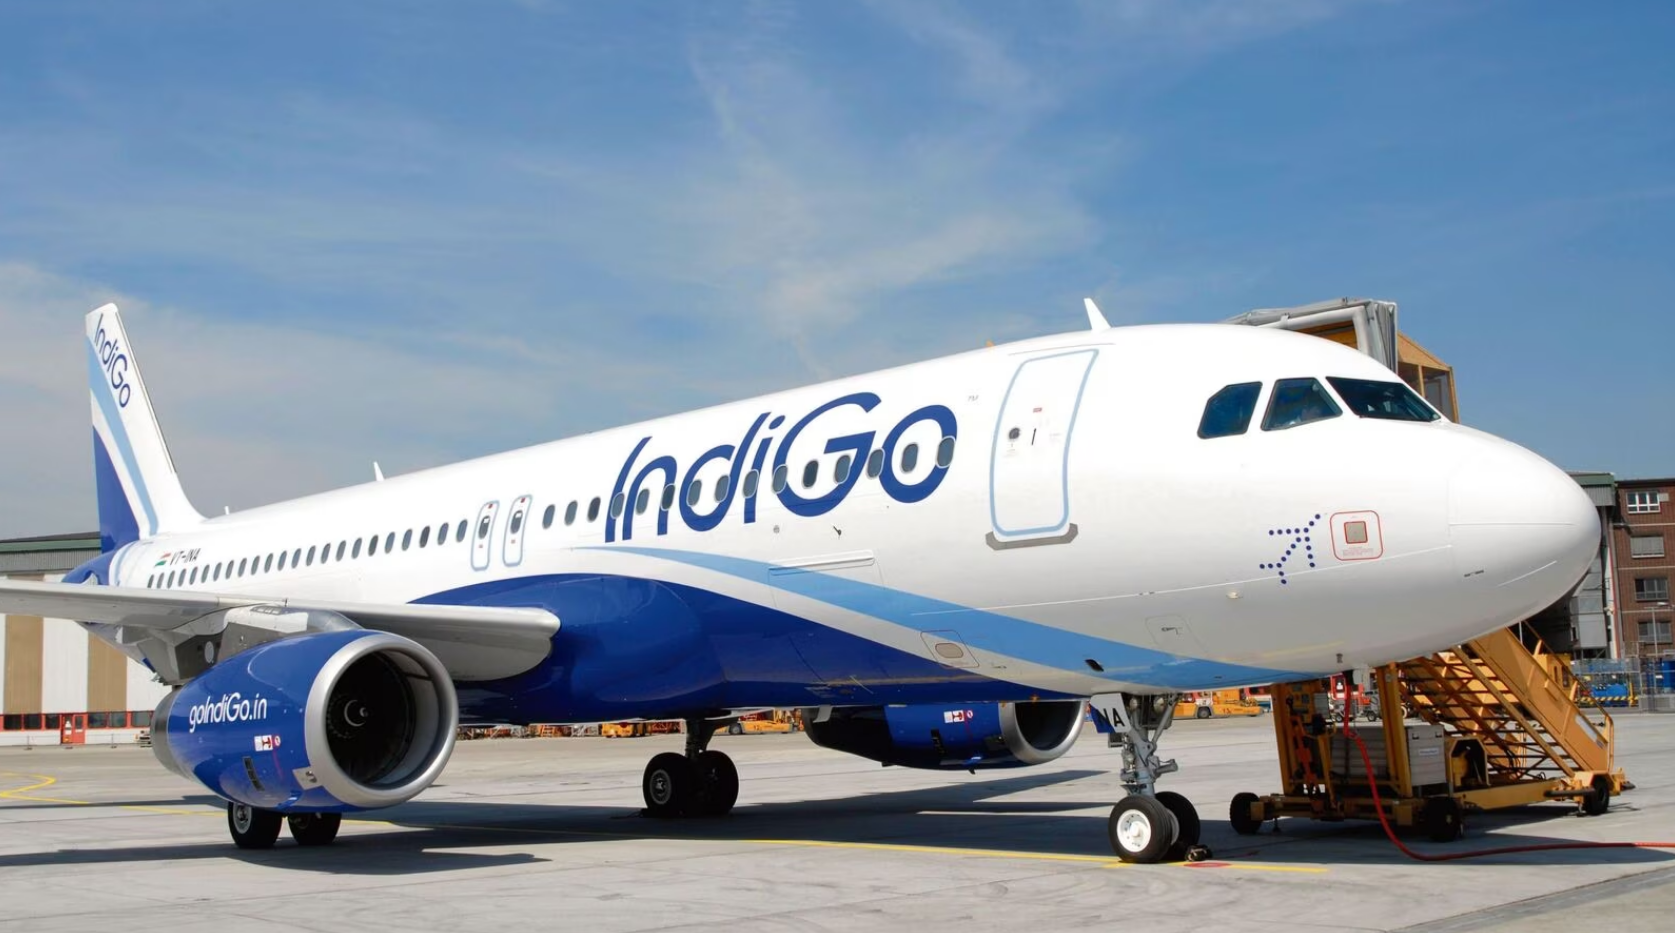 IndiGo pilots will utilize devices to measure their fatigue levels.